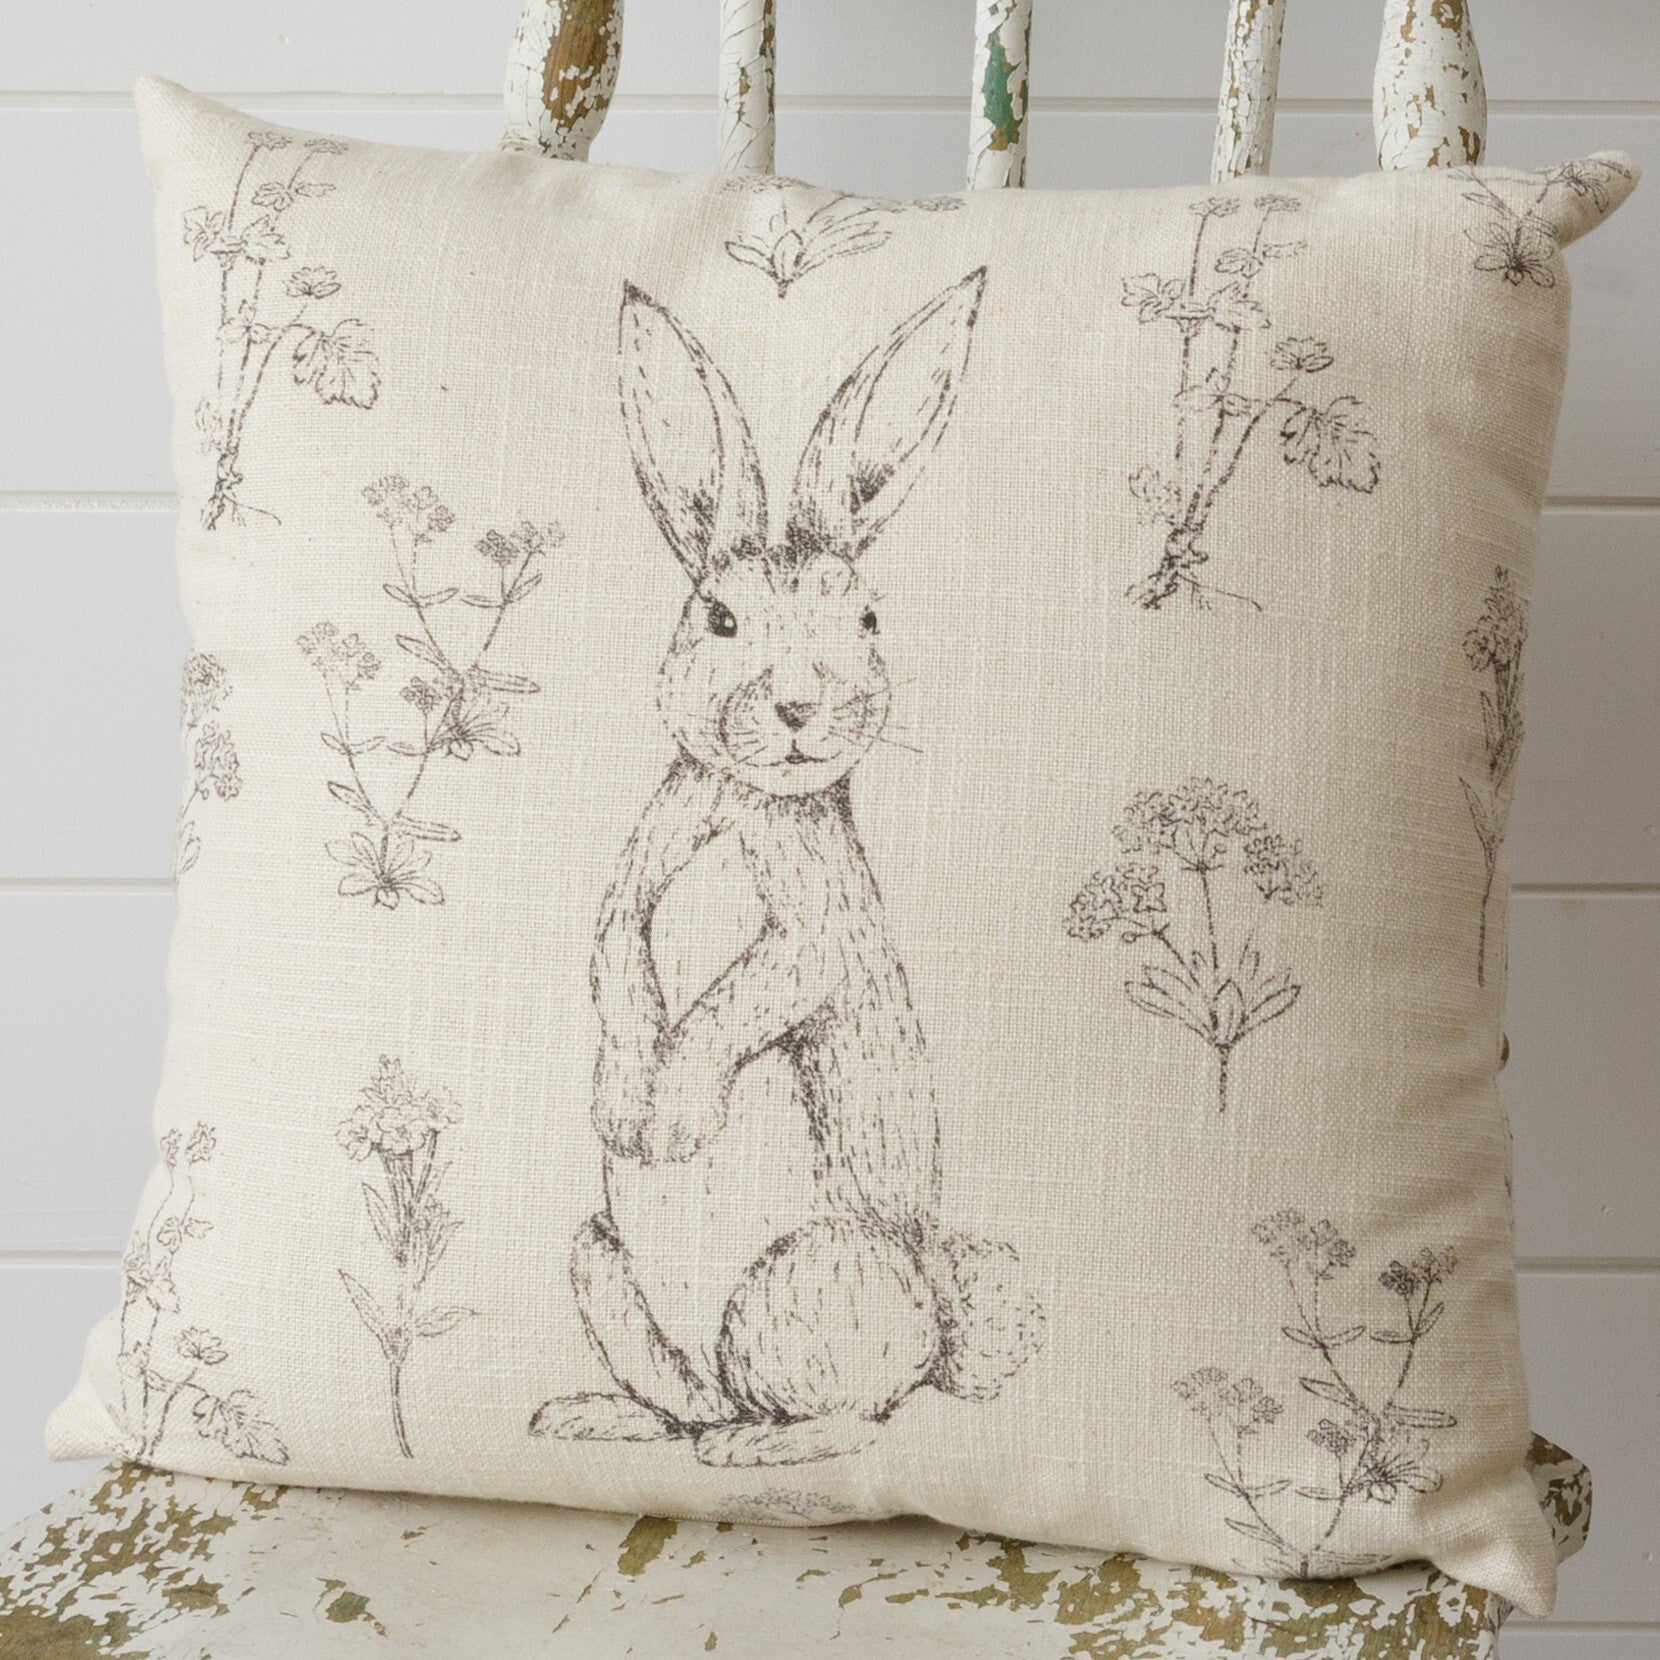 Rabbits and Wildflowers Pillow